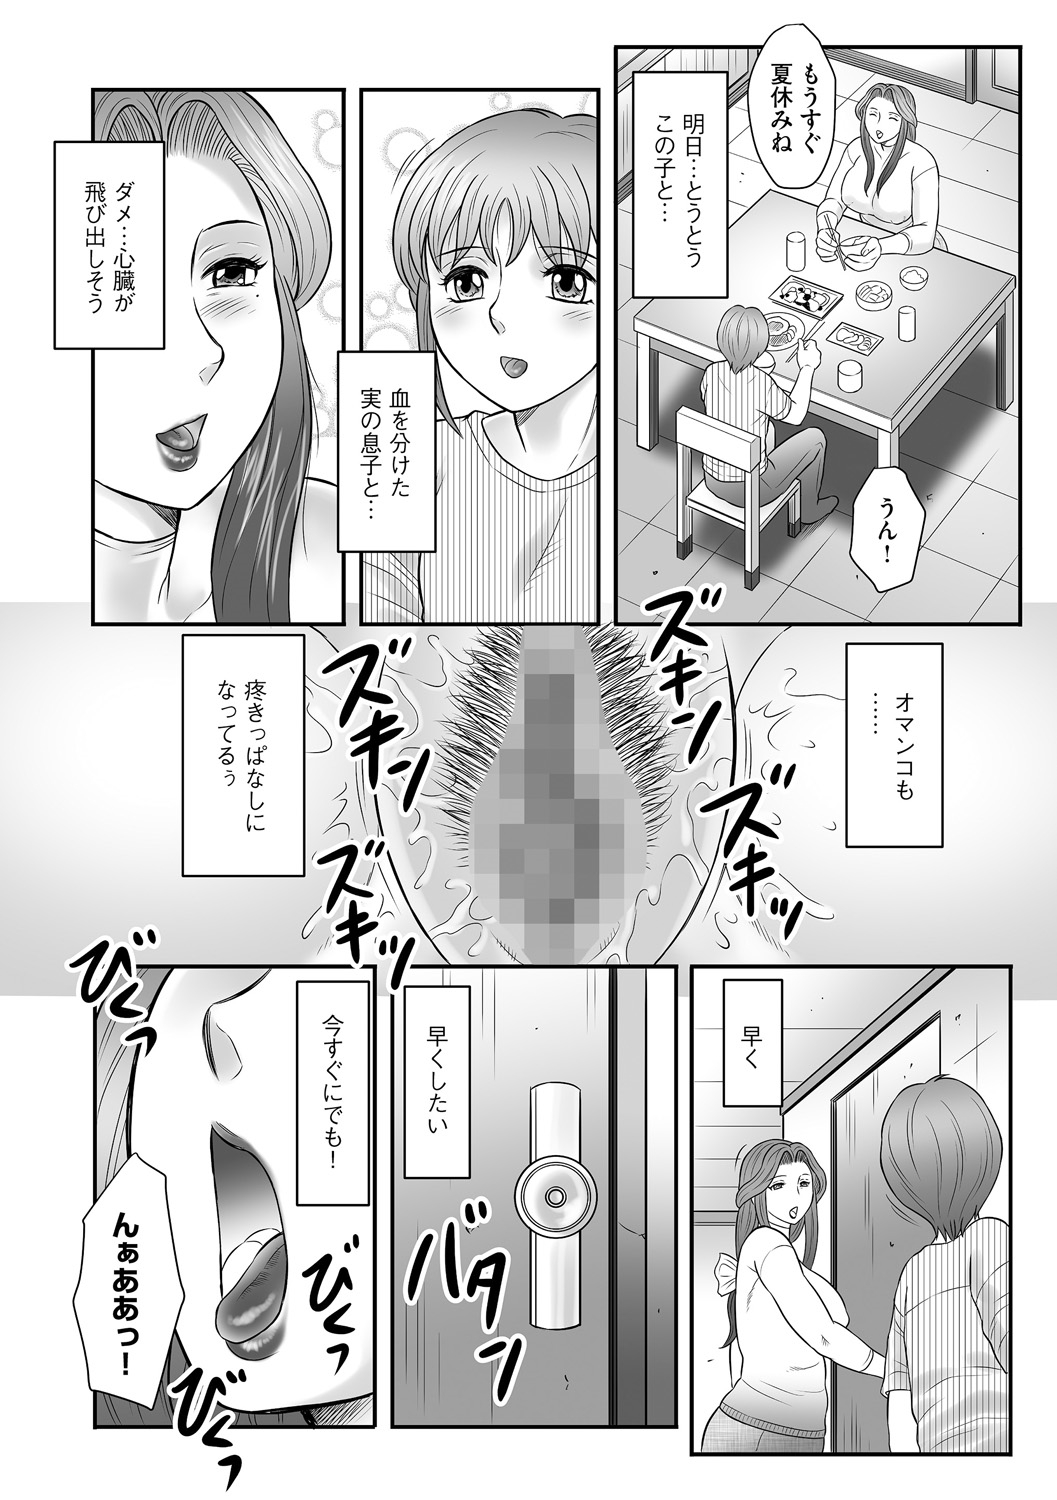 [Fuusen Club] Boshi no Susume - The advice of the mother and child Ch. 17 (Magazine Cyberia Vol. 76) [Digital] page 6 full